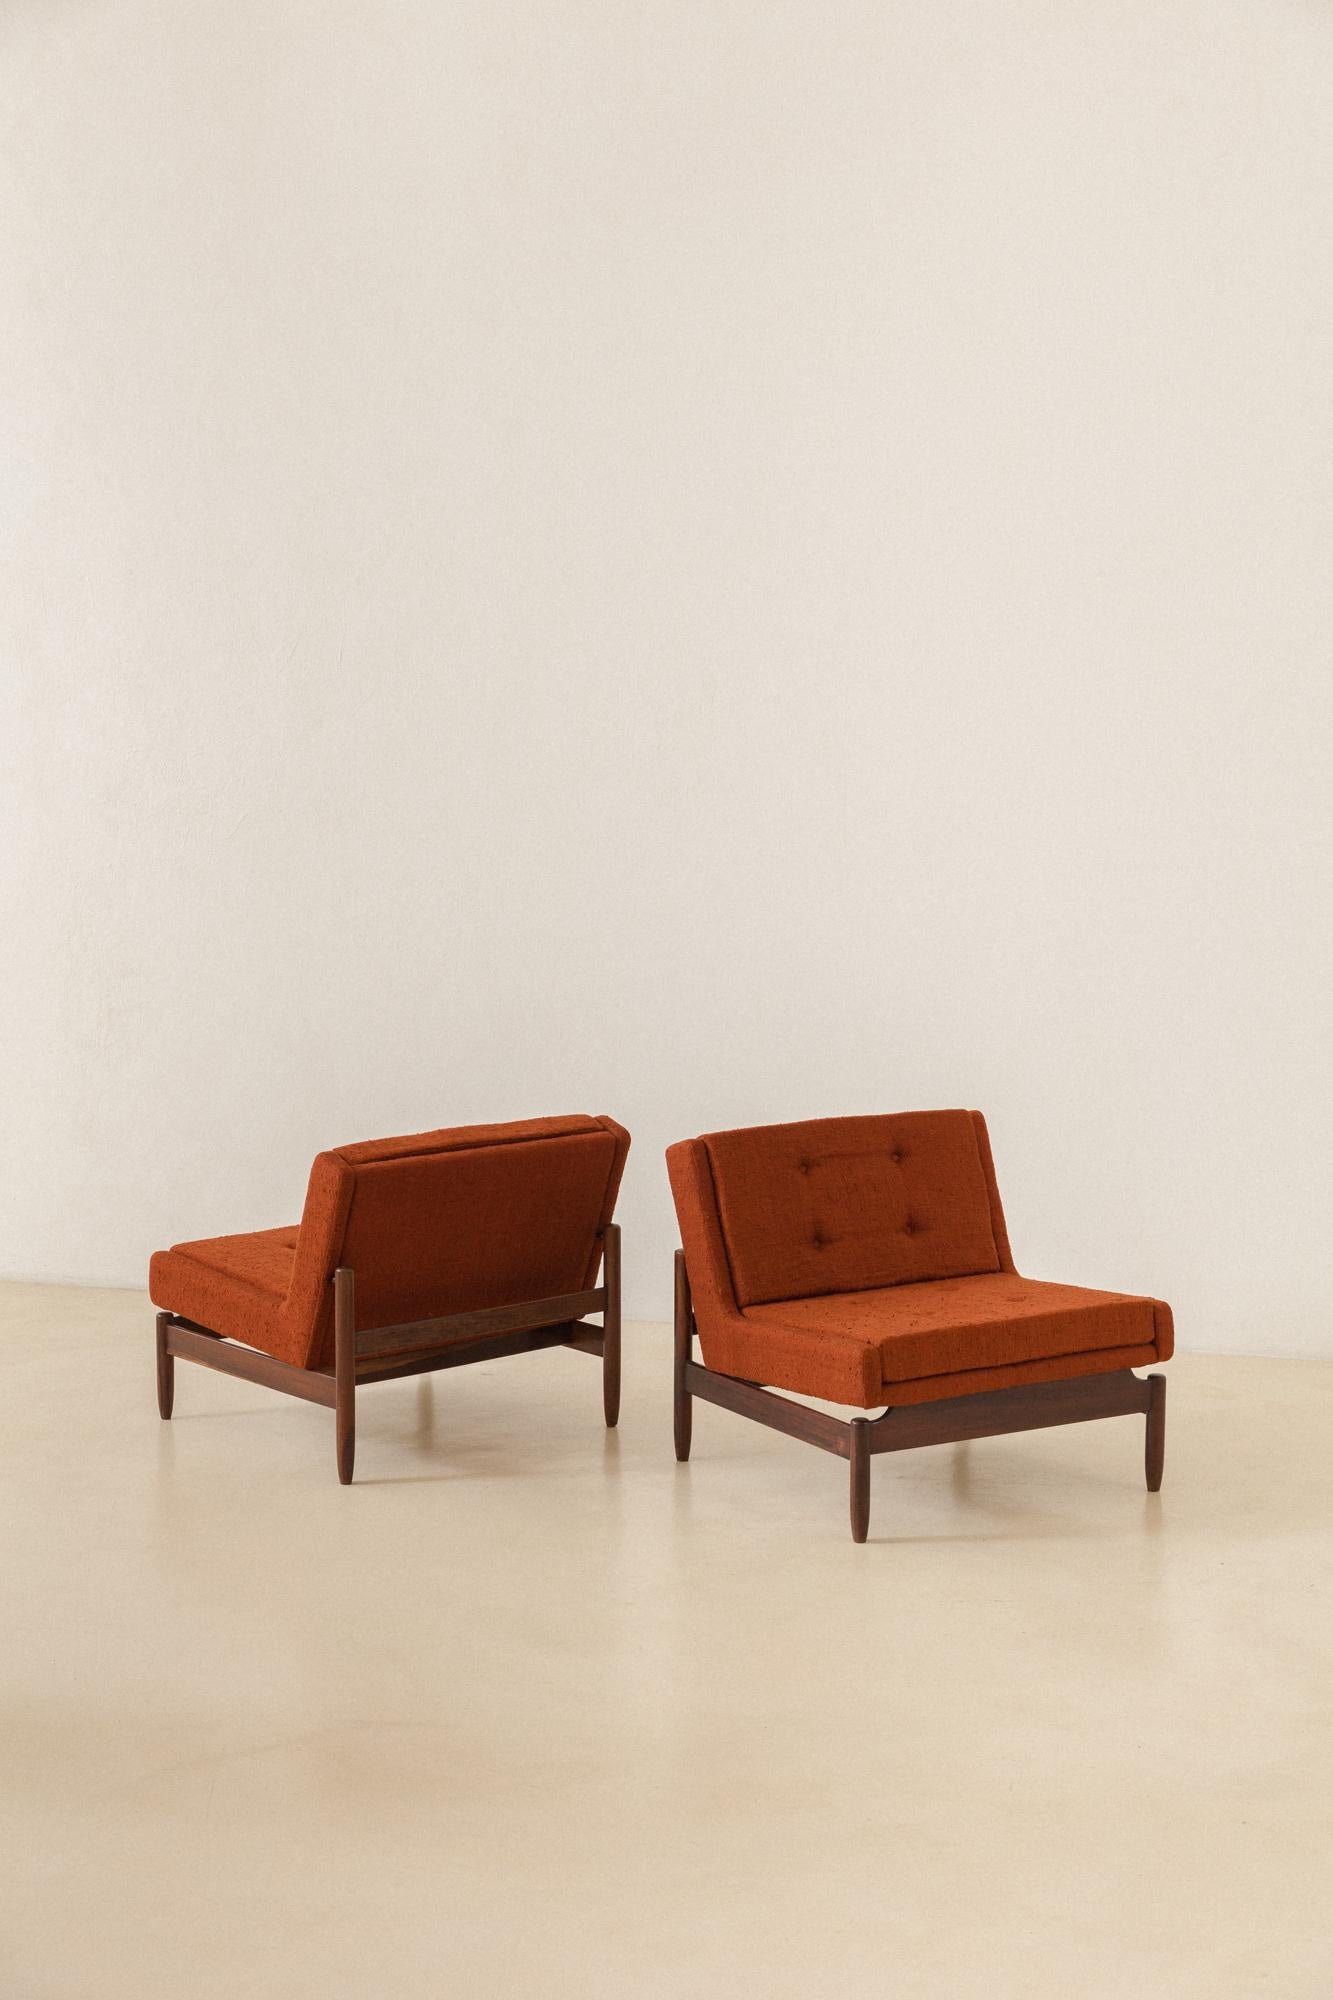 These armchairs were produced by Cantù Móveis e Interiores Ltda. in the 1960s and were presented in the company catalog from this period. With structure turned in solid Rosewood and rounded details, the upholstered seats, backrests, and loose